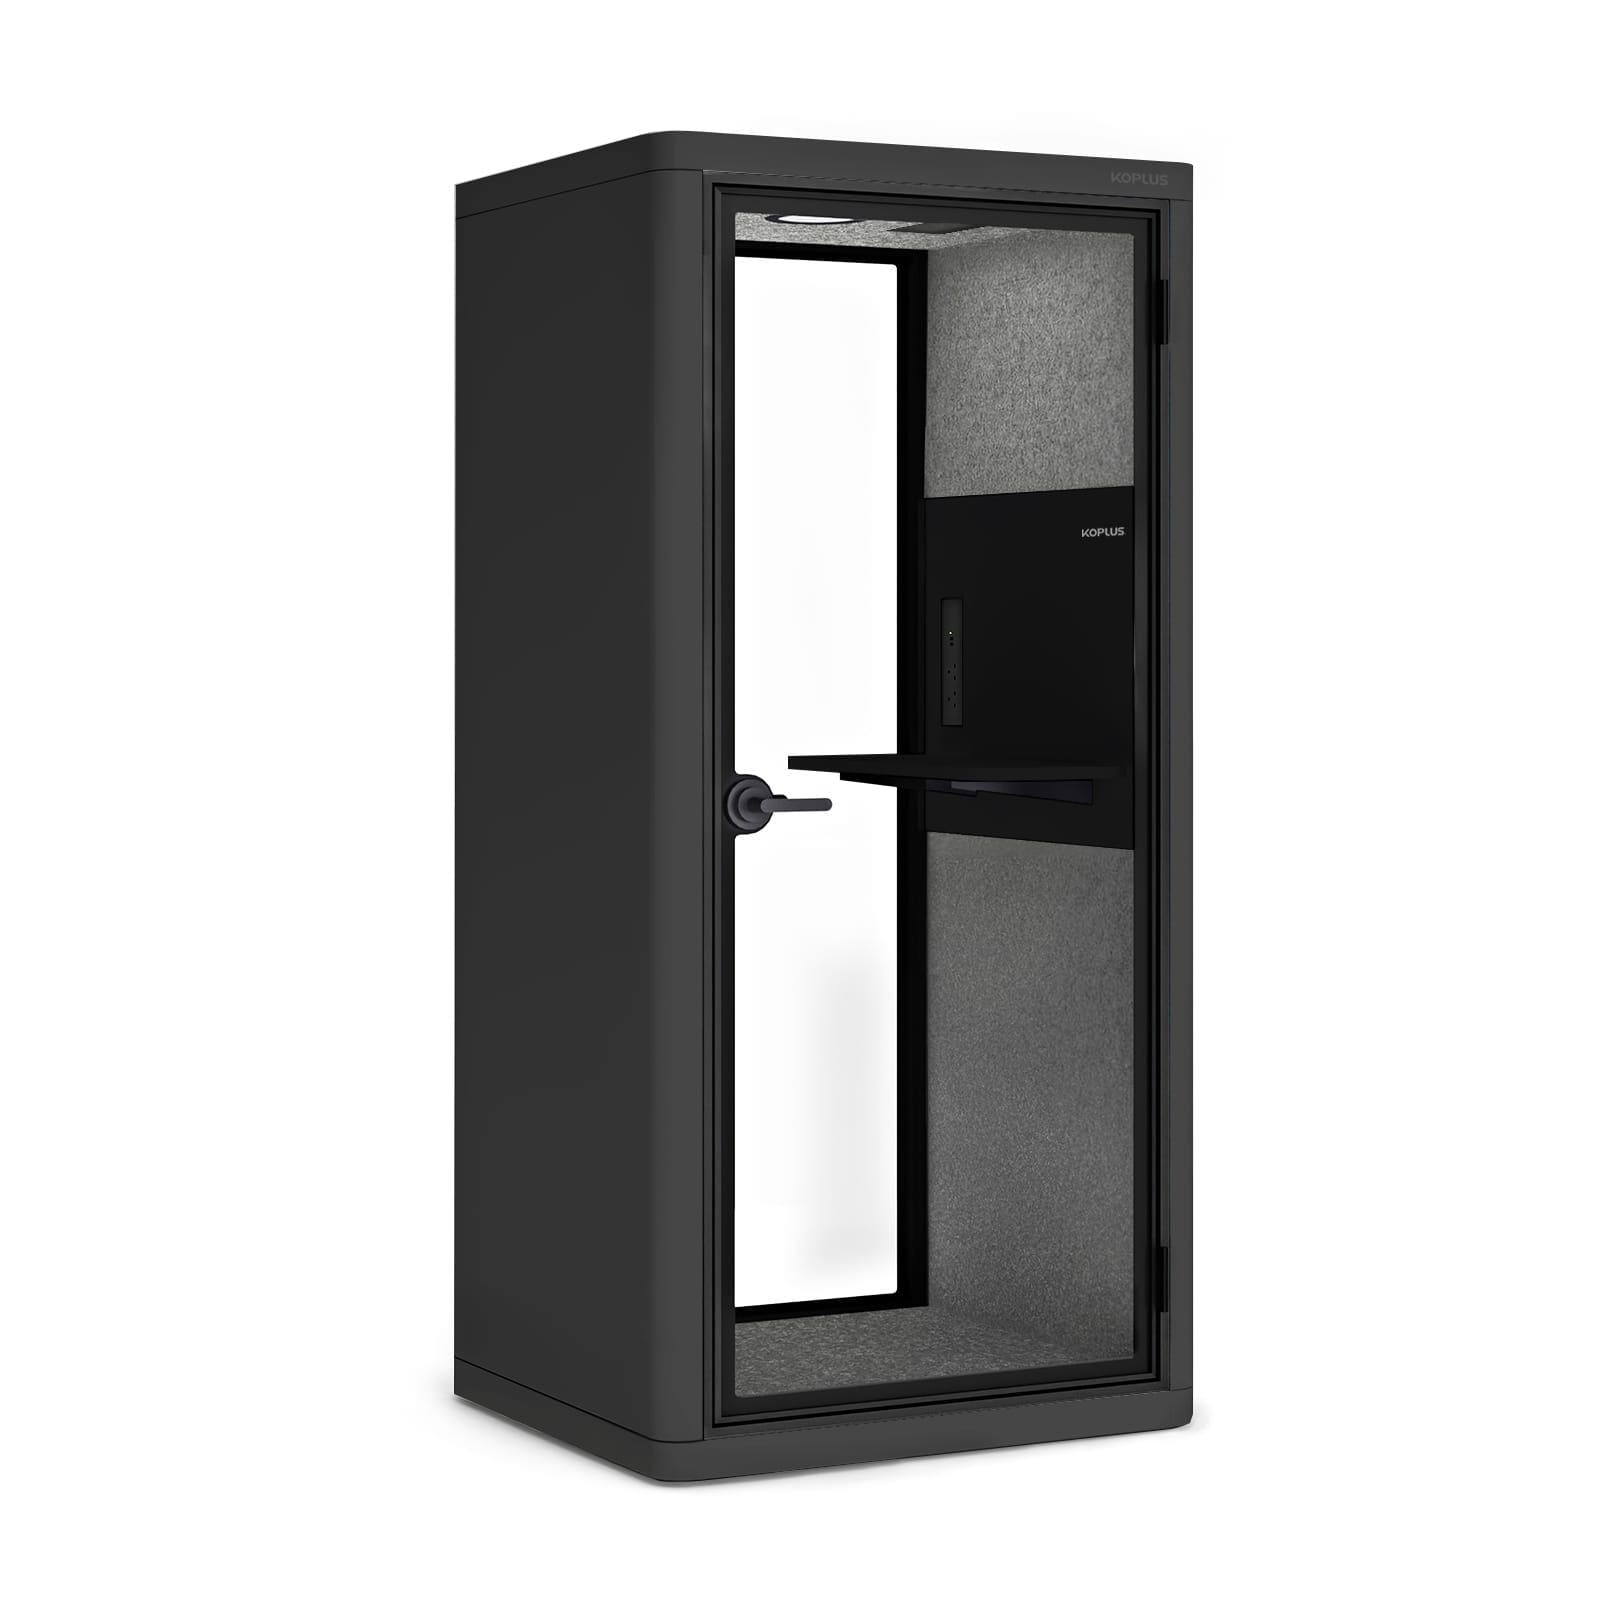 Koplus Milli Stand phone booth in graphite grey with light grey PET interior